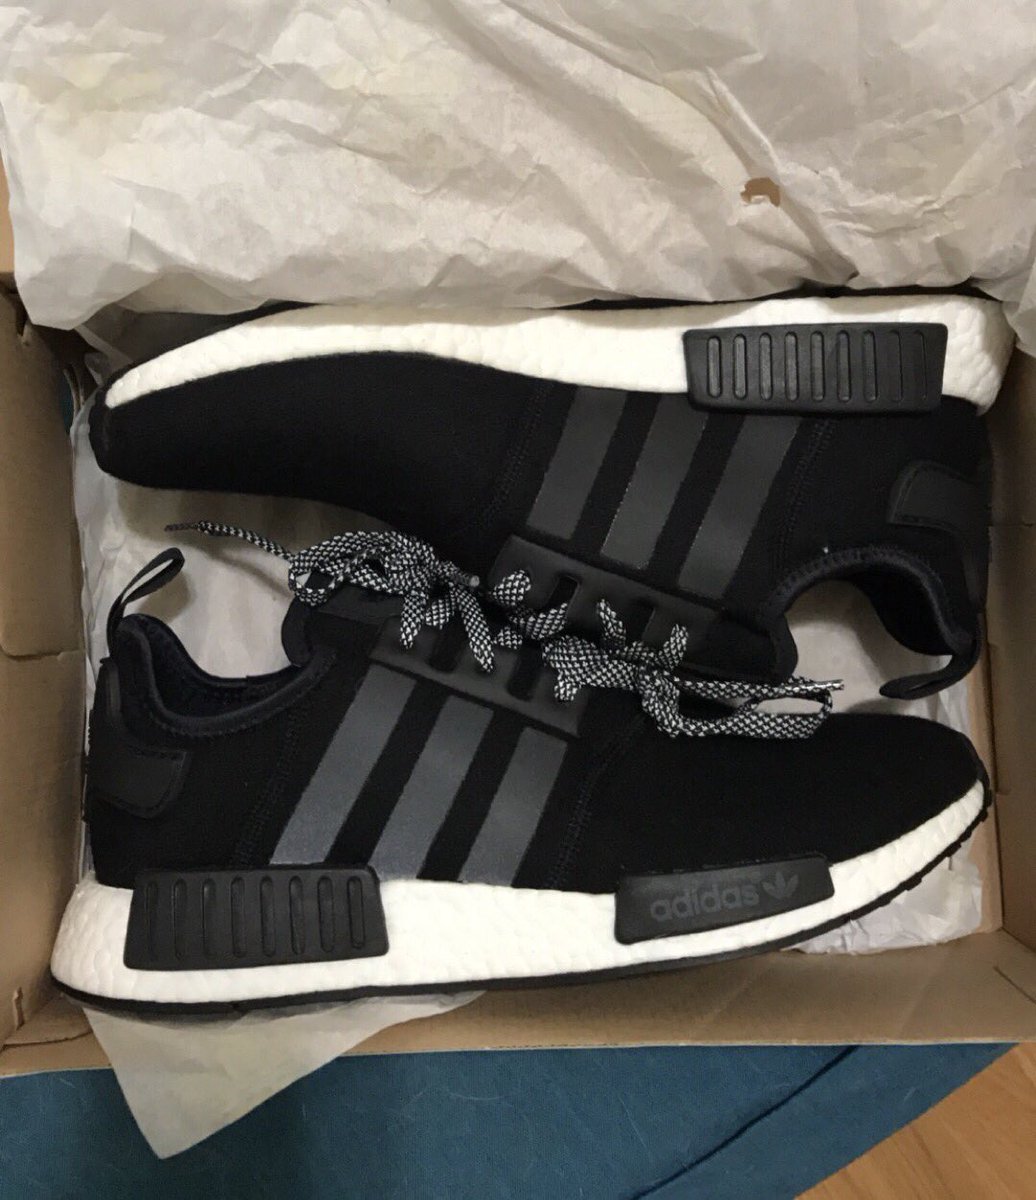 adidas nmd r1 unboxing